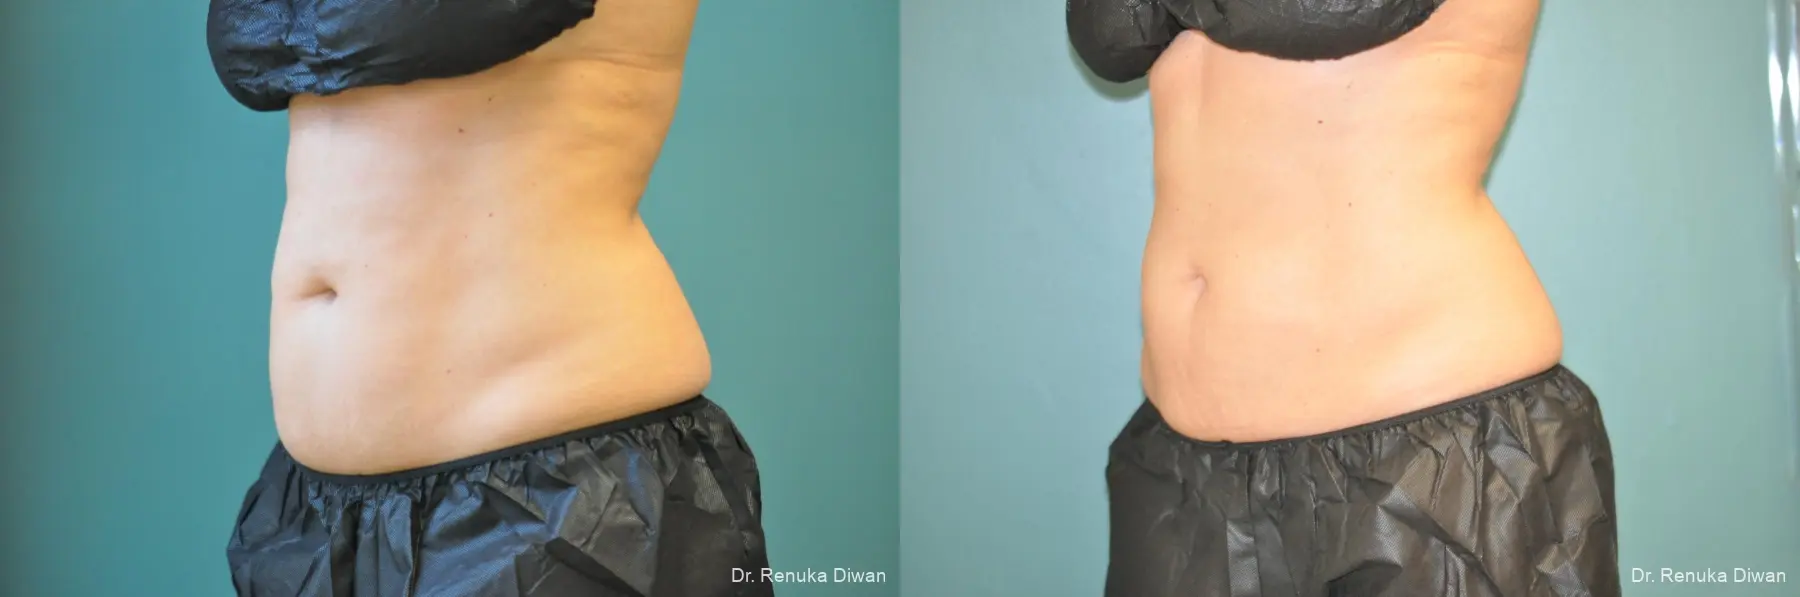 CoolSculpting®: Patient 4 - Before and After 3